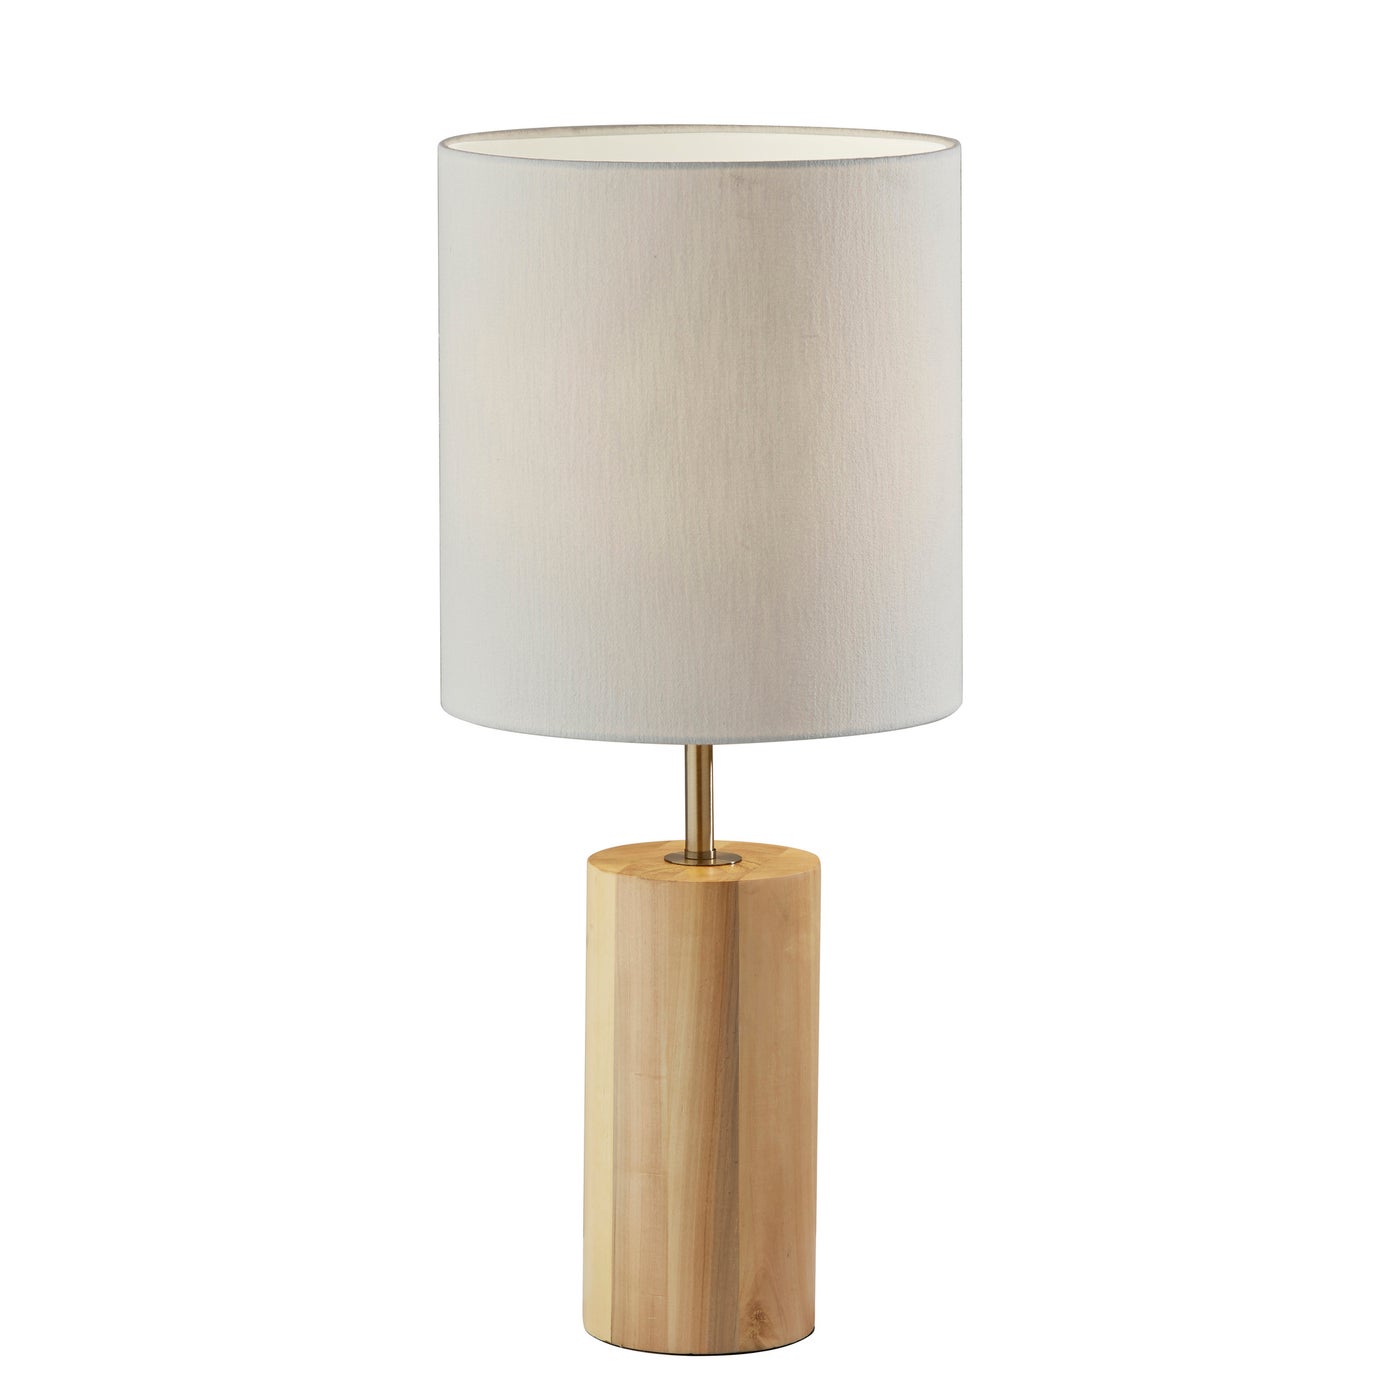 Adesso Home - 1507-12 - Table Lamp - Dean - Natural Oak Wood W. Antique Brass Accent